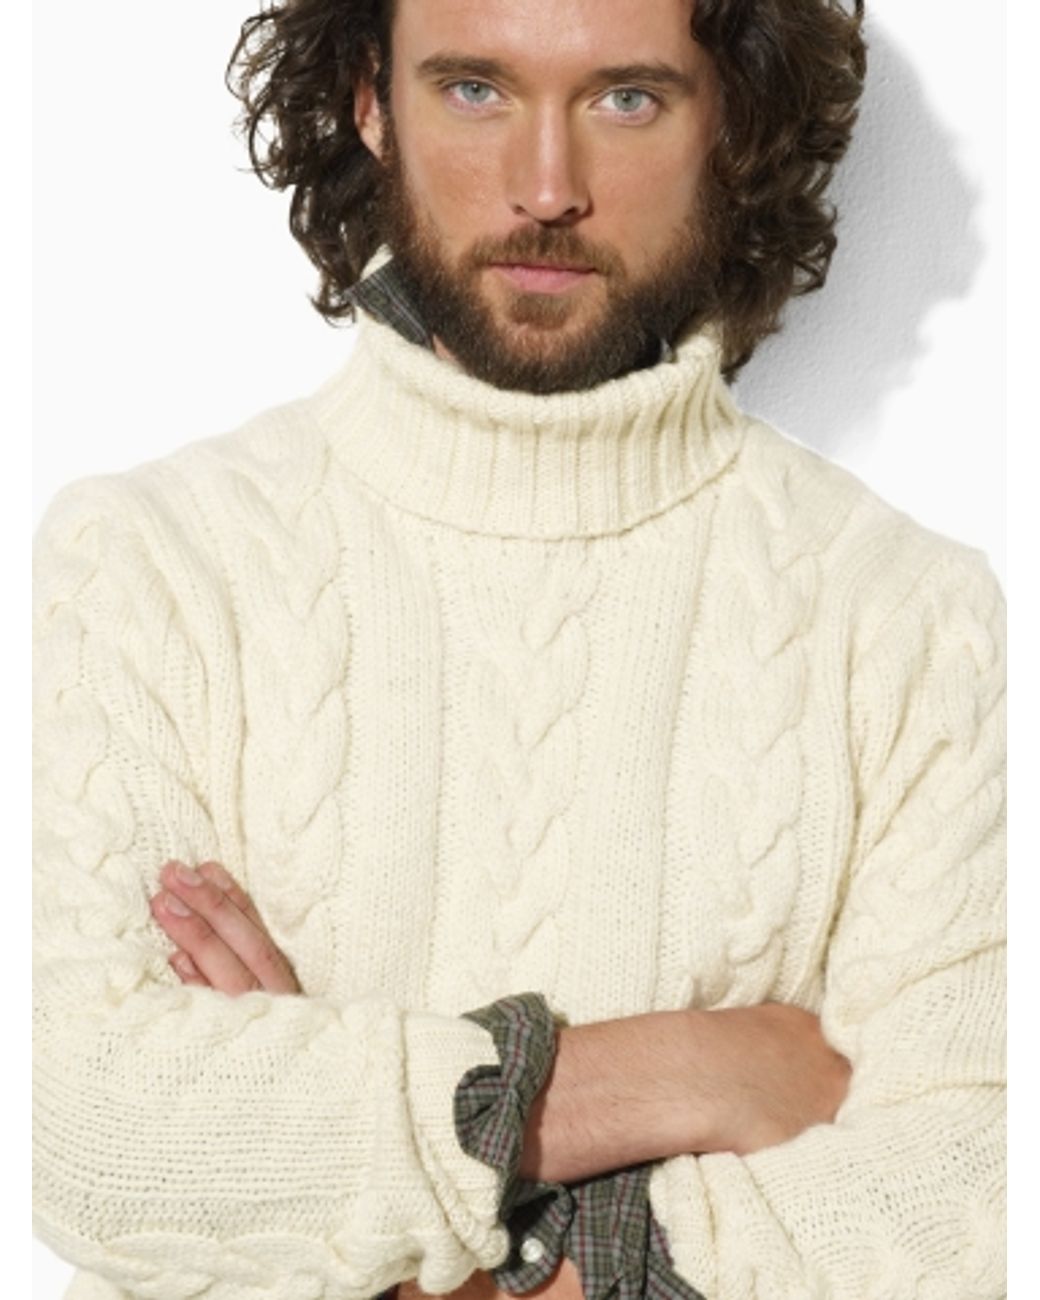 Save 8% Mens Clothing Sweaters and knitwear Turtlenecks Ralph Lauren Cashmere Aran Sweater for Men 